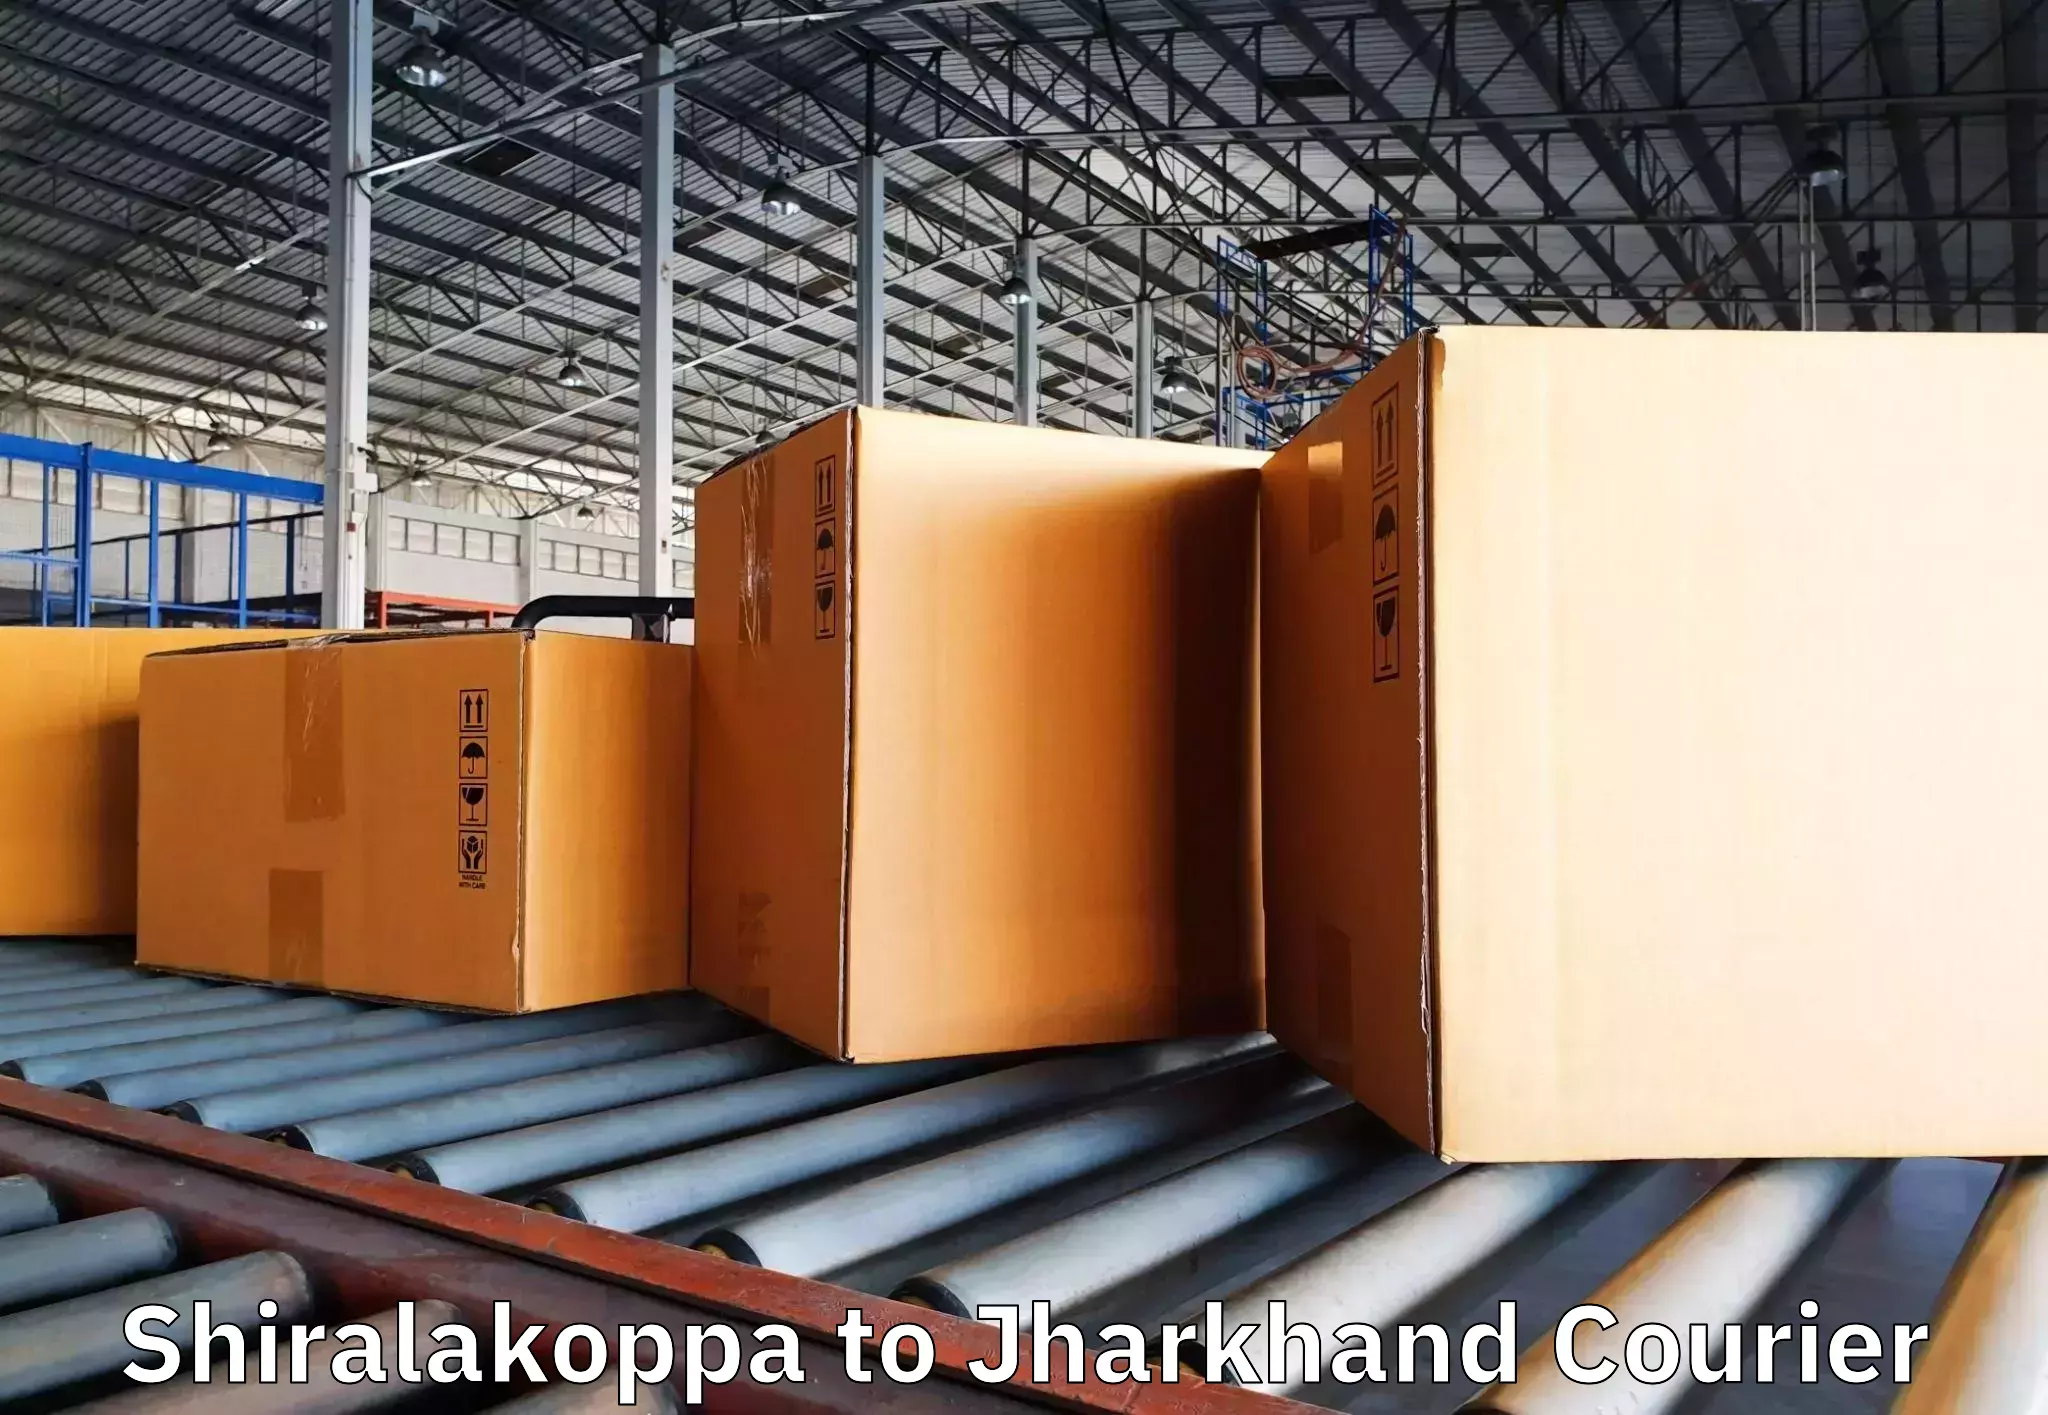 Furniture moving specialists Shiralakoppa to Peterbar